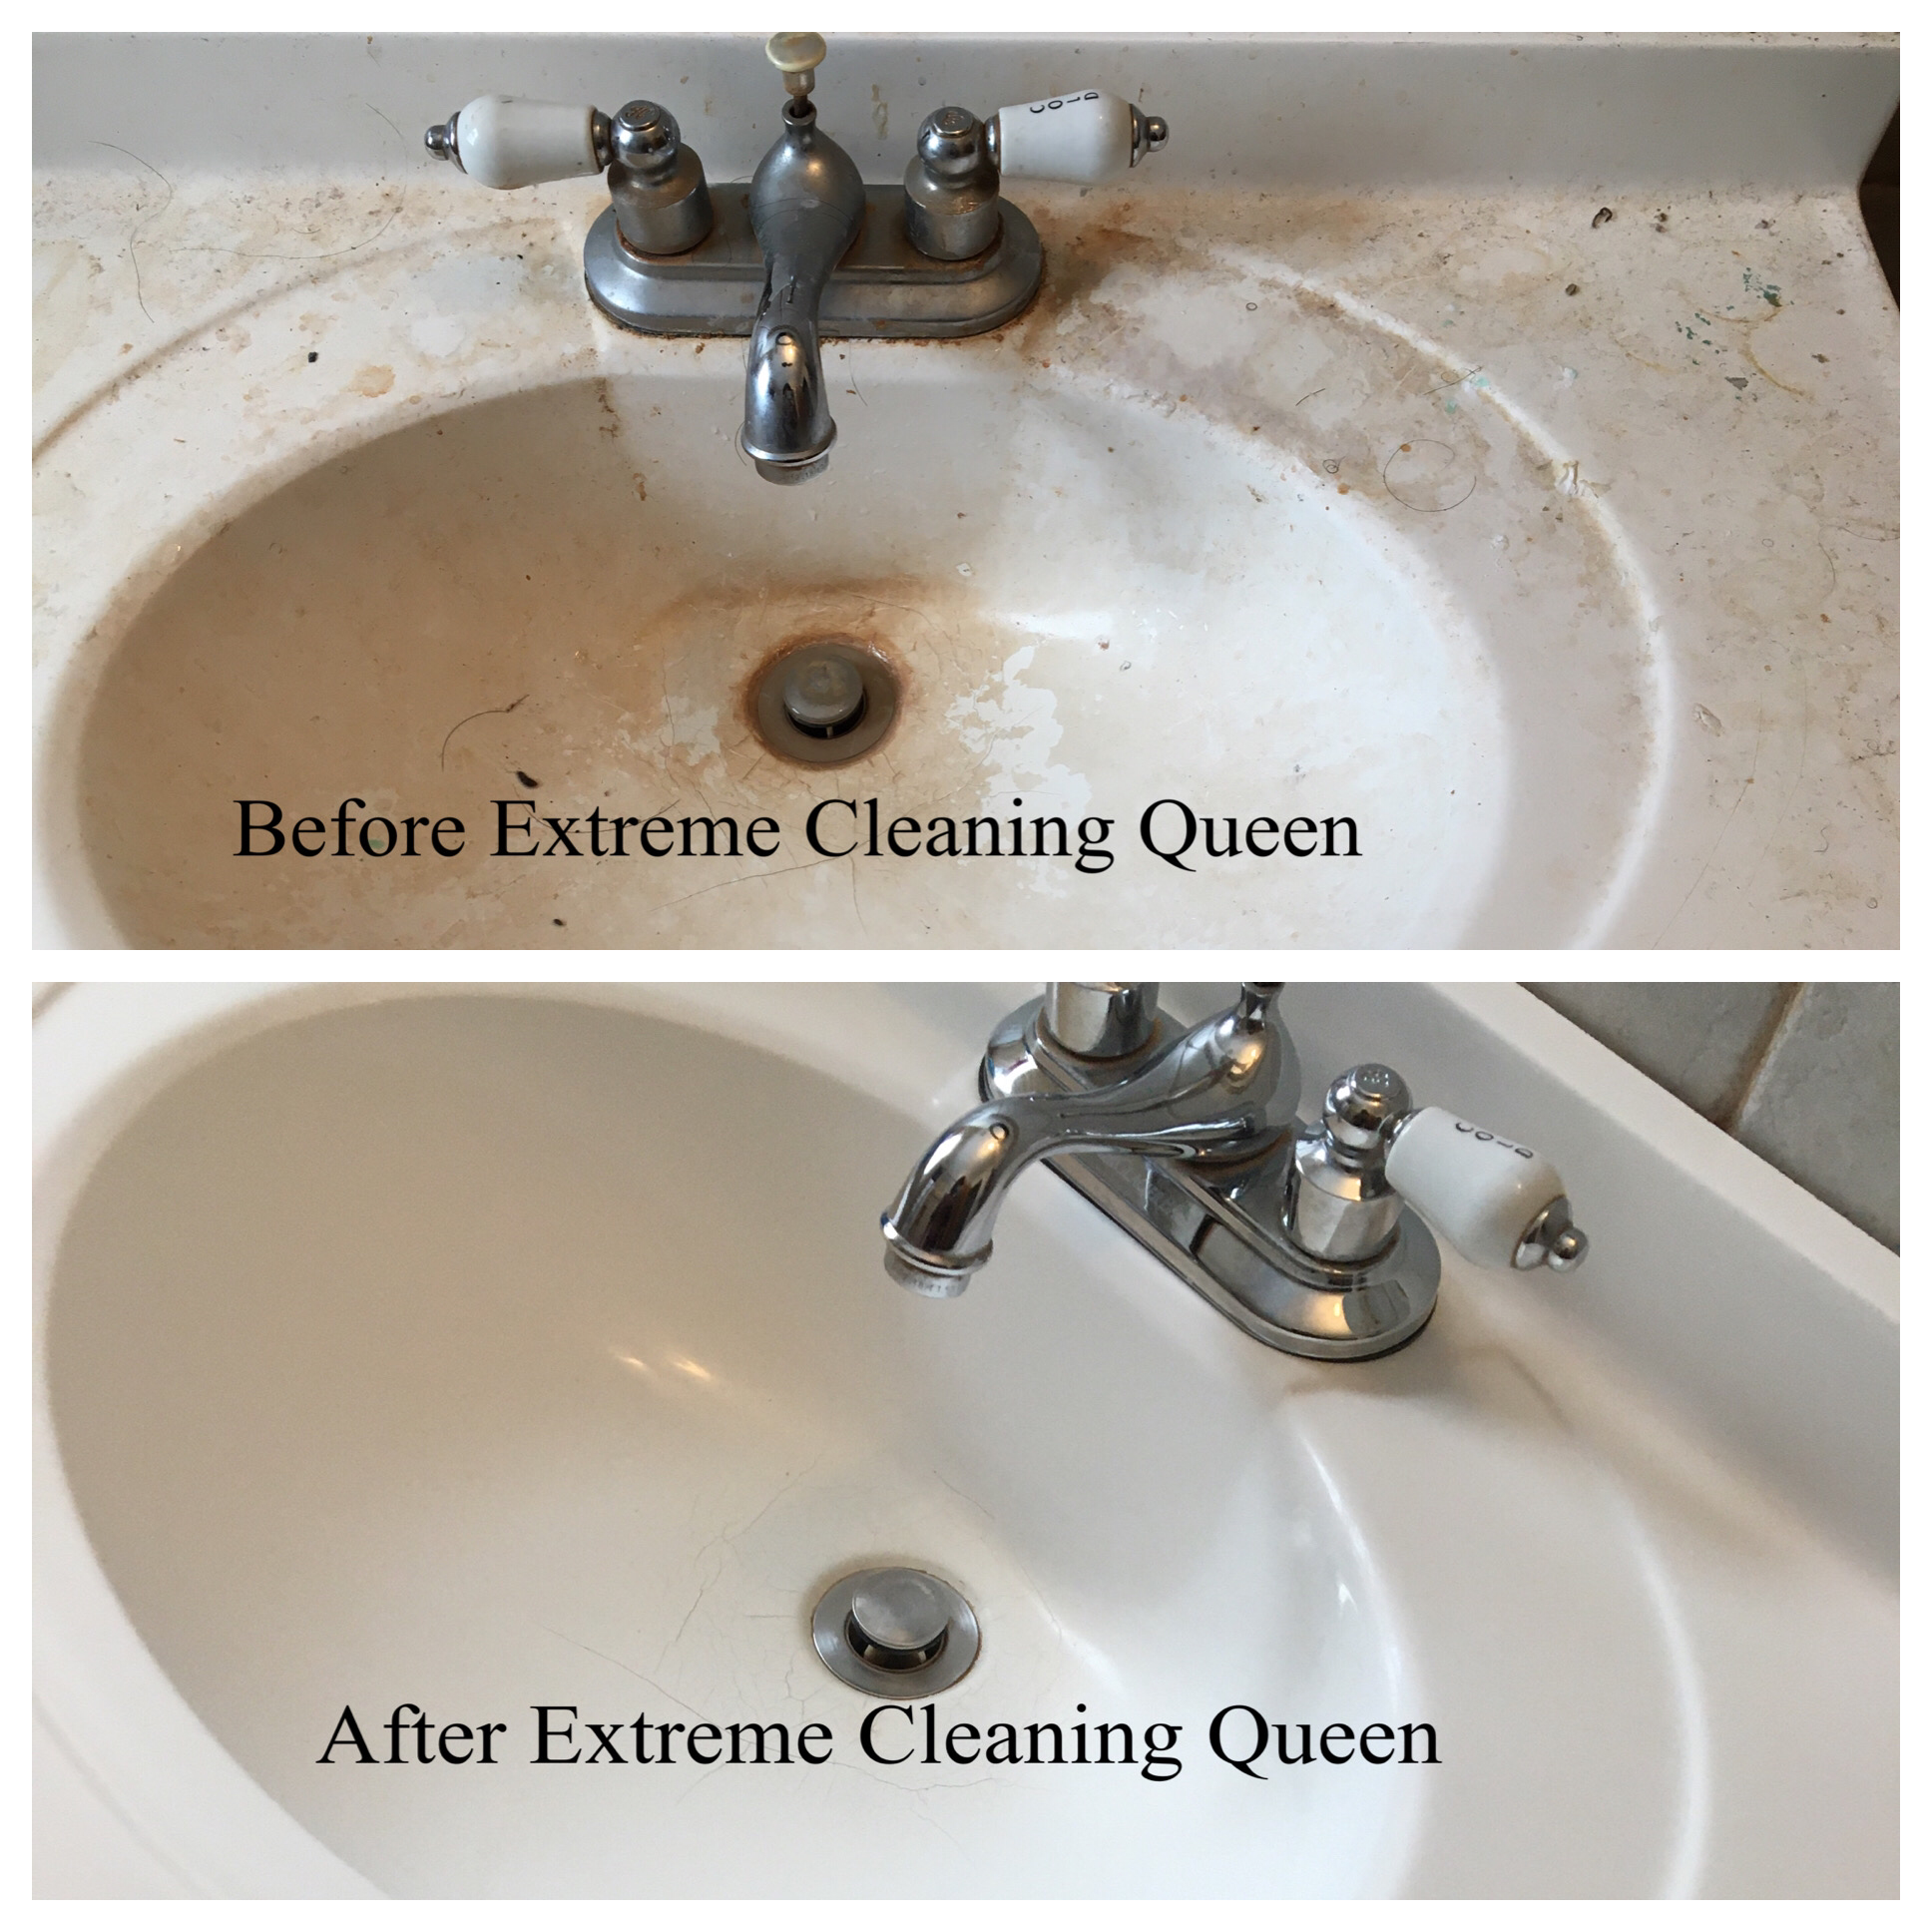 Extreme Cleaning Queen 127 Mohawk Ave, Scotia New York 12302